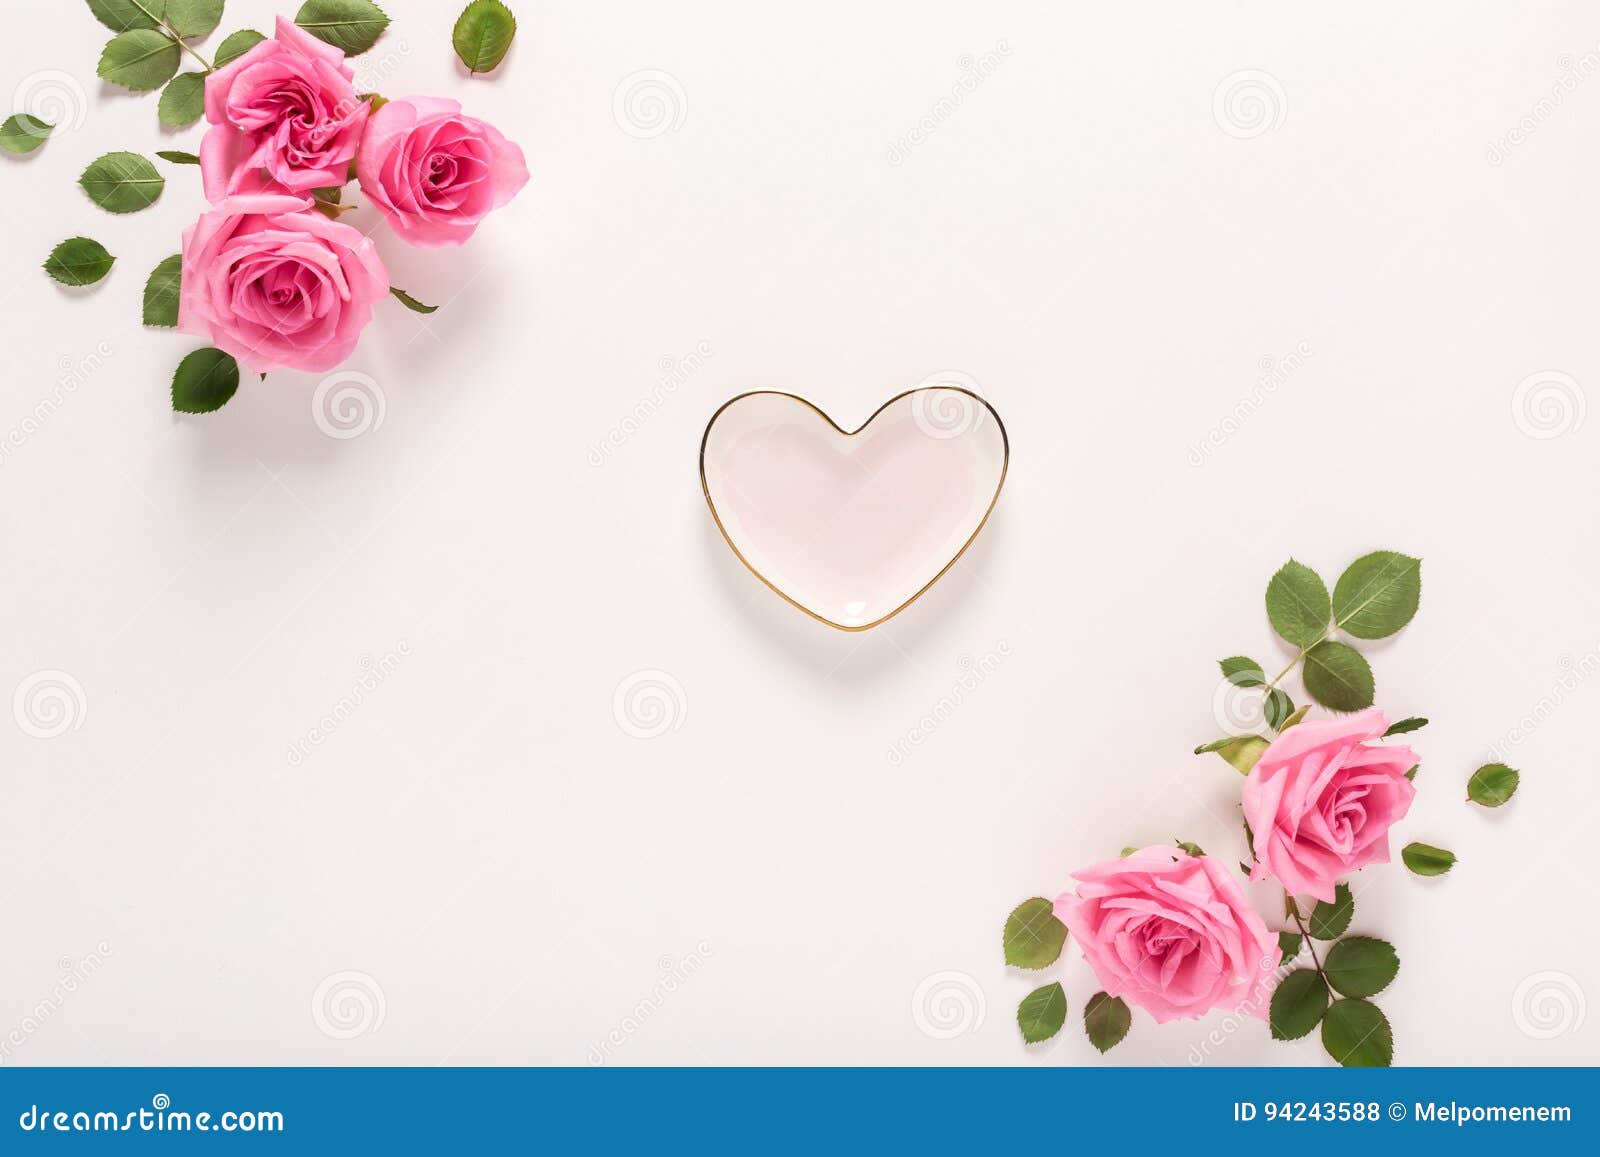 Valentines Day Theme with Rose Petals Stock Photo - Image of pink ...